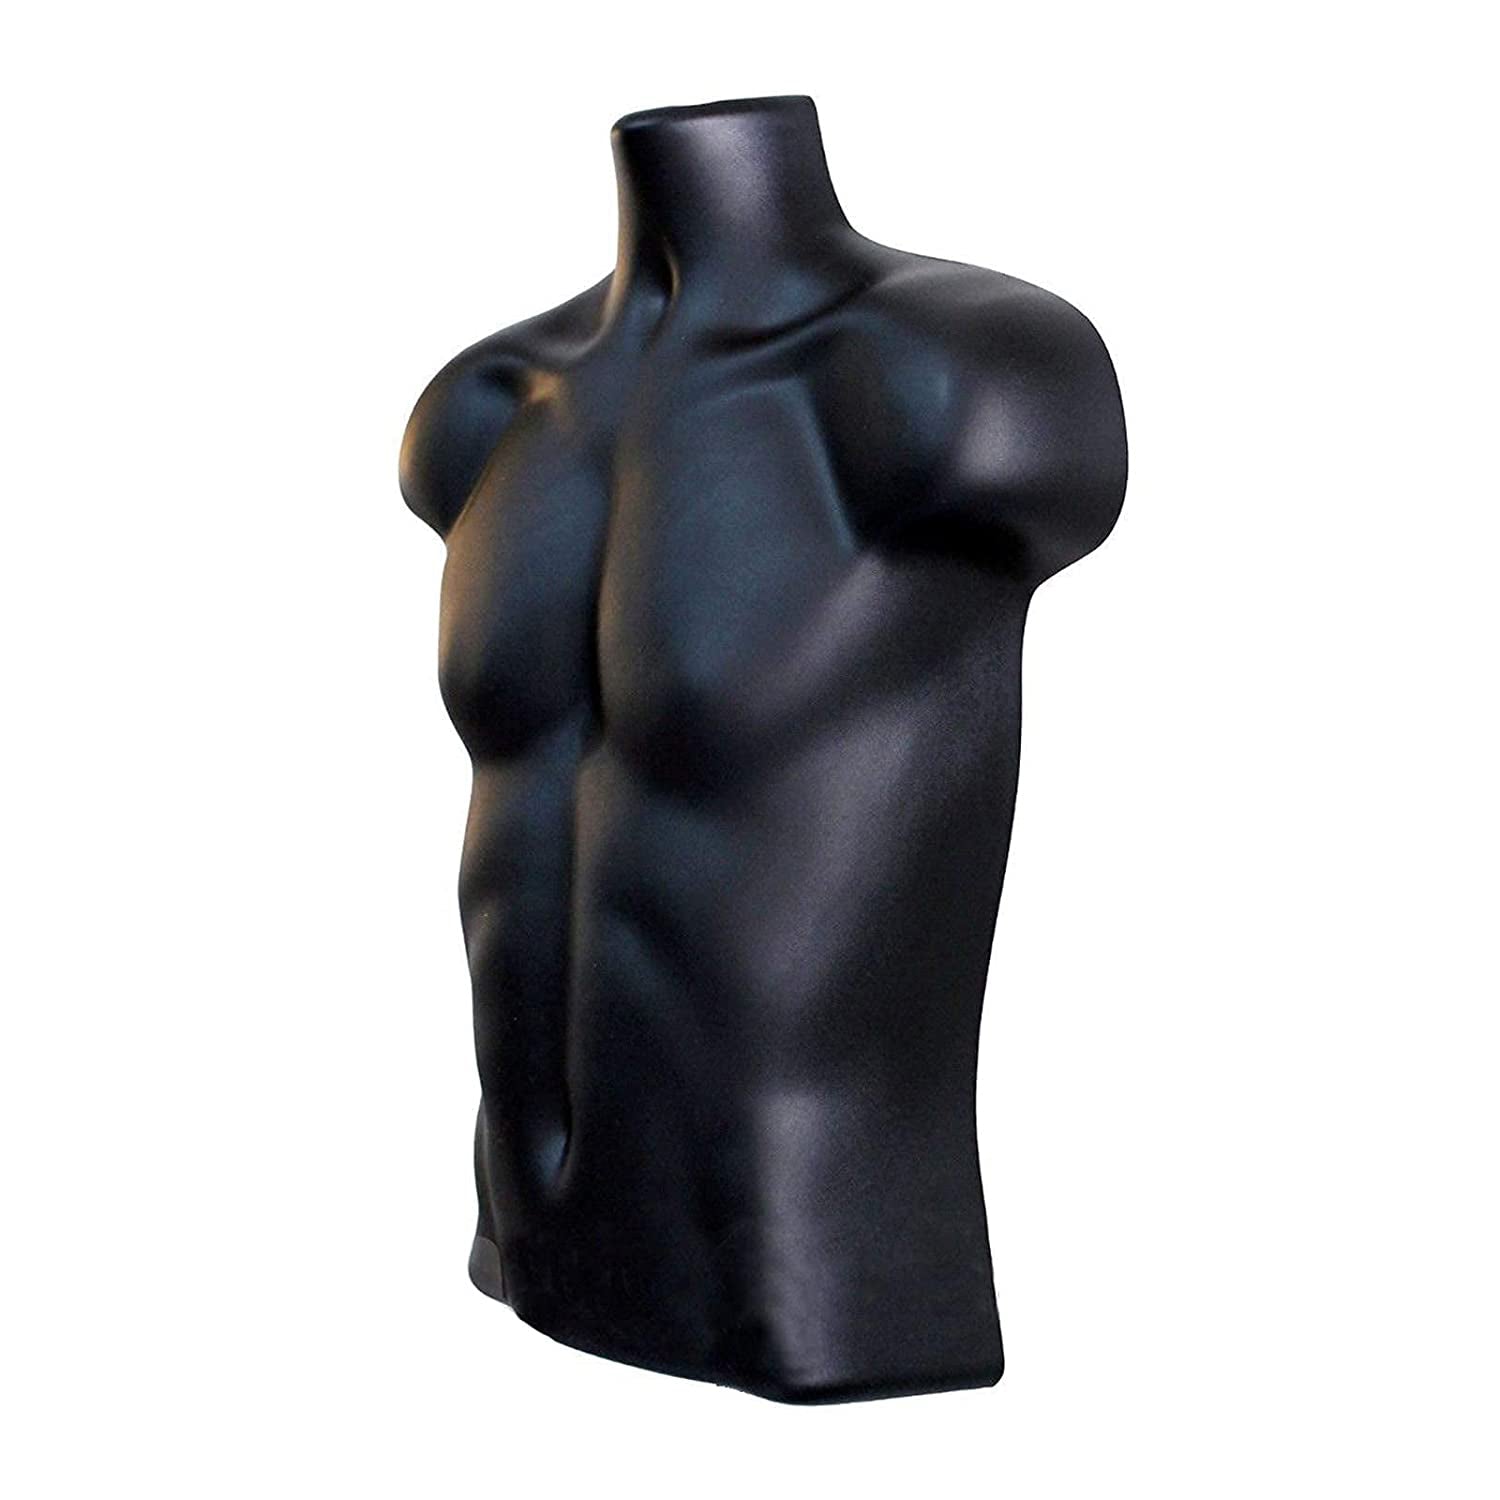 Zimtown Male Full Body Mannequin Manikin Metal Stand Display, Skin Color 